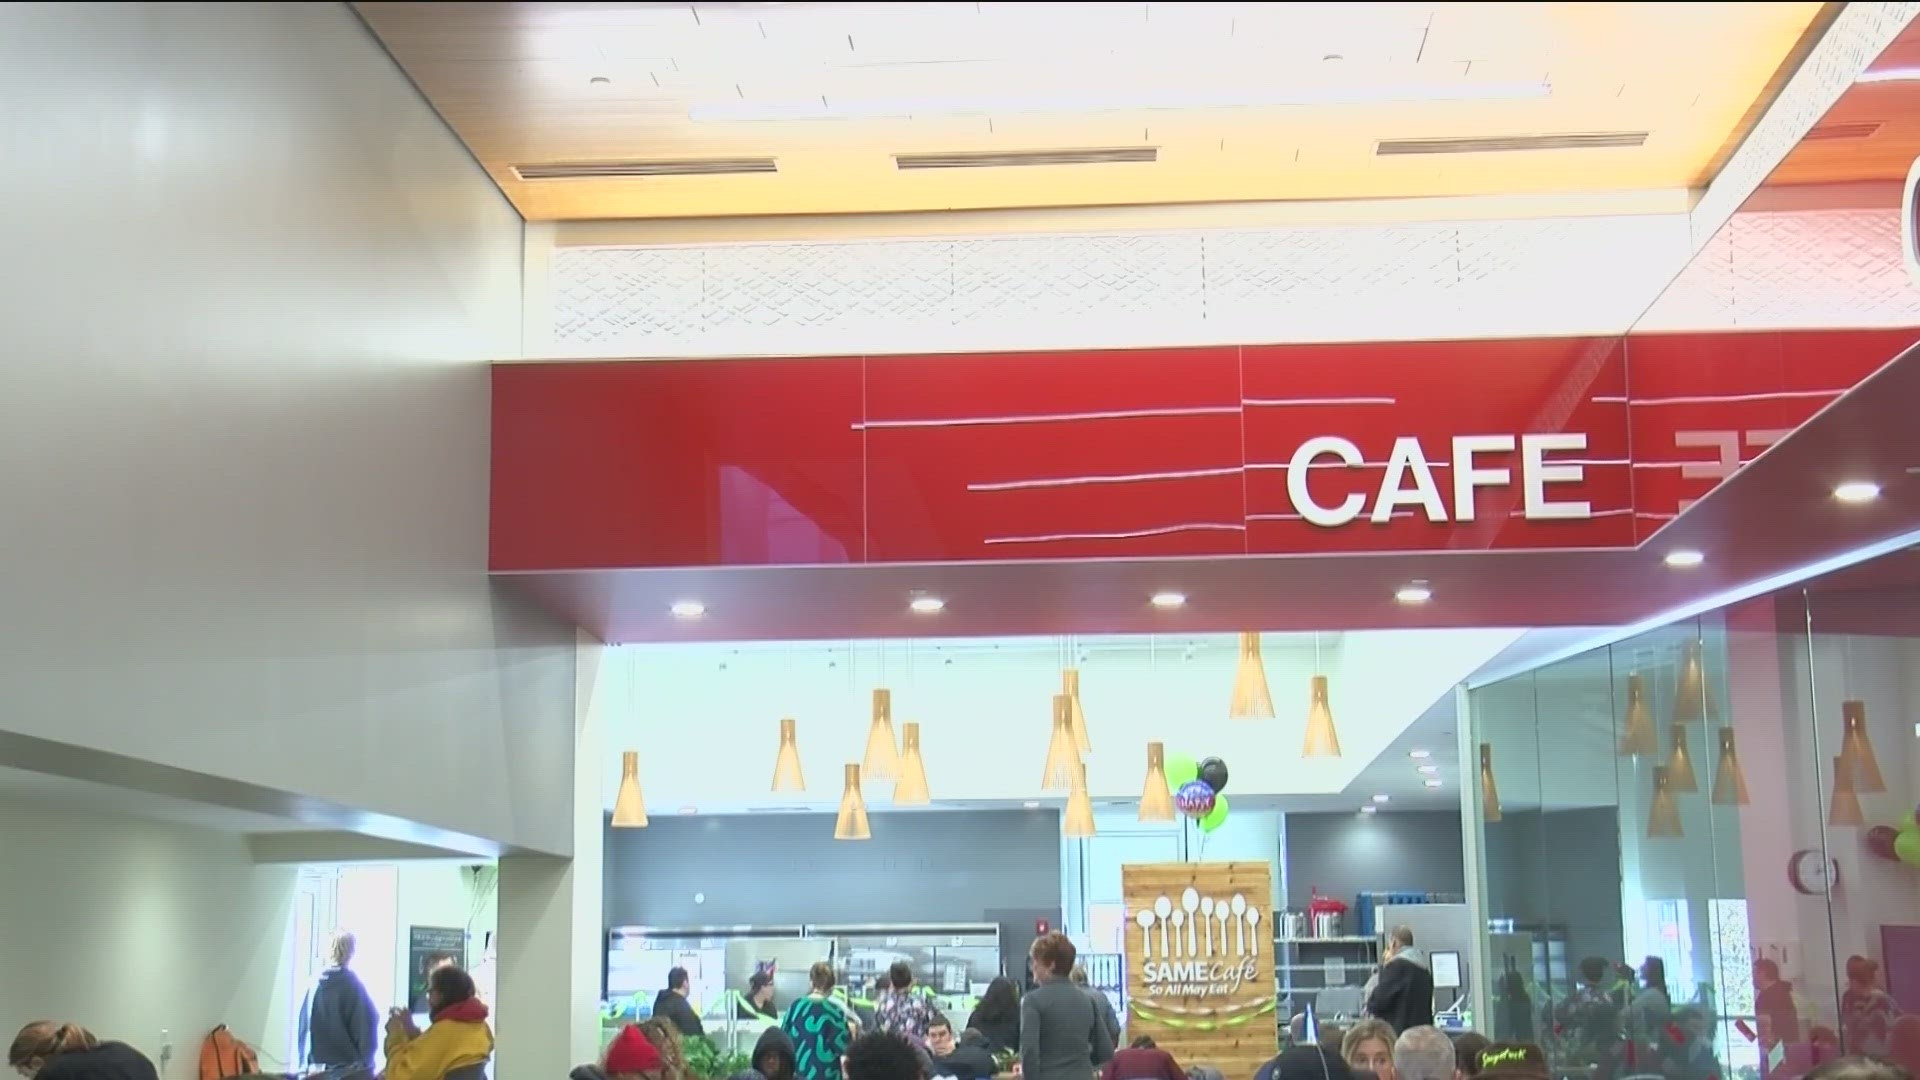 The cafe, located in the main library in downtown Toledo, is celebrating one year of giving the community what its name stands for: a place 'So All Can Eat.'